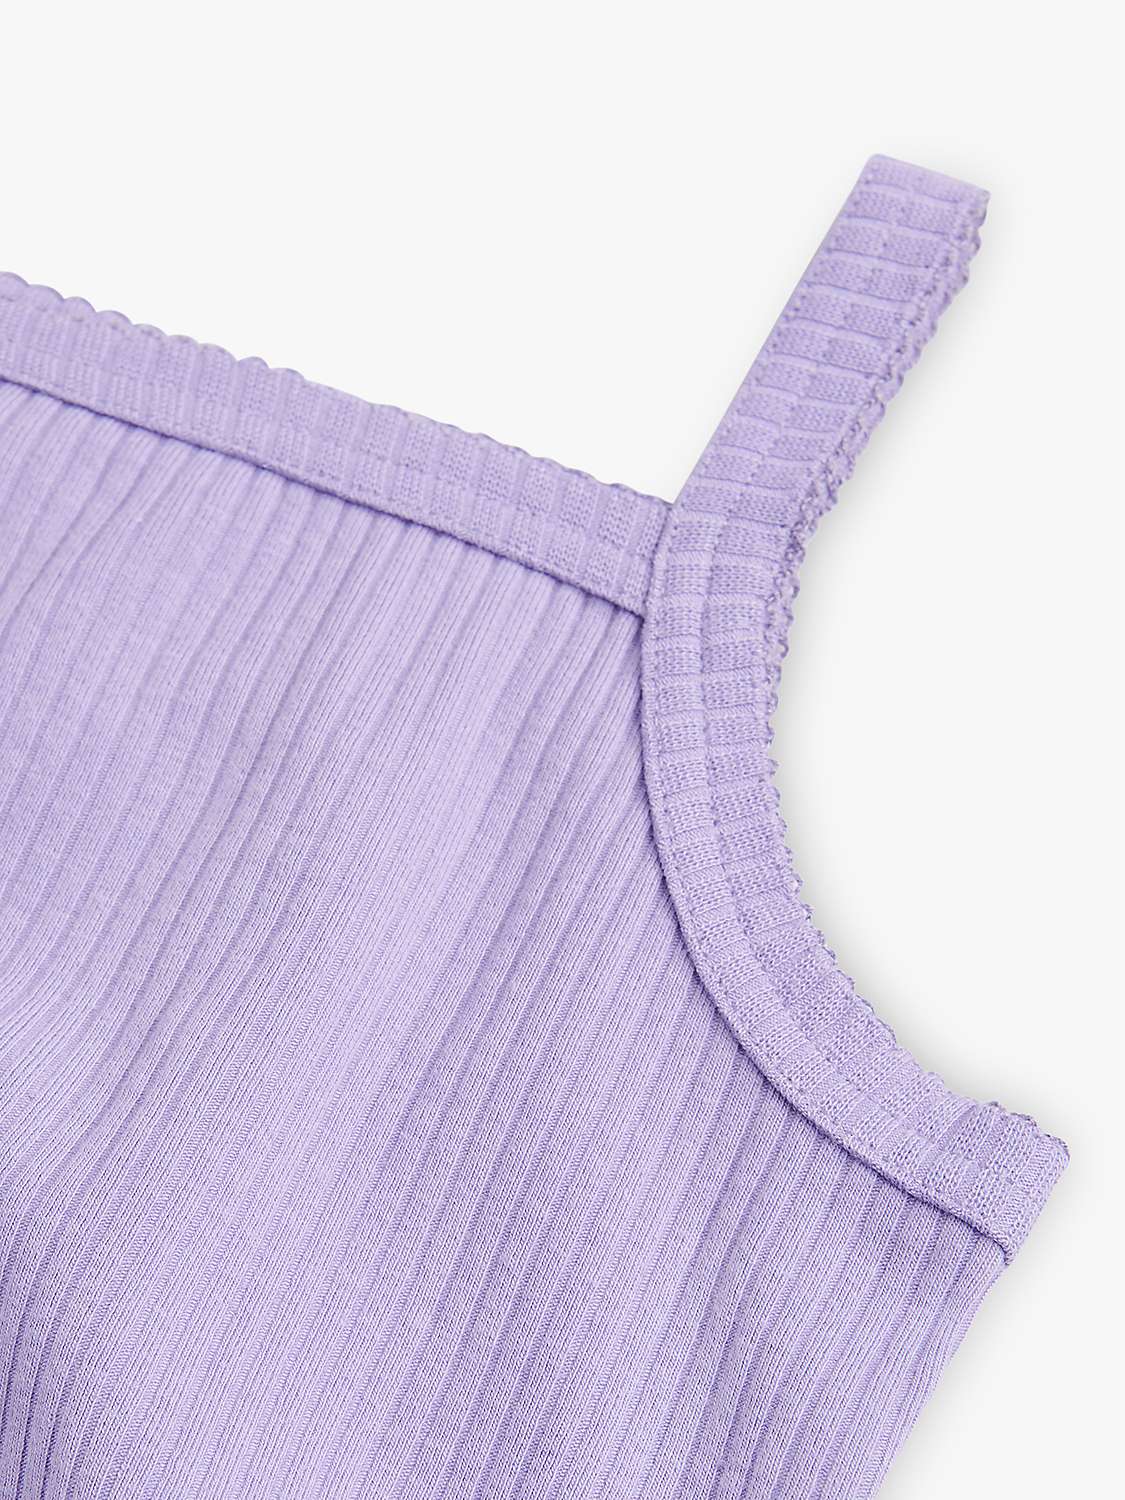 Buy Whistles Kids' Strappy Ribbed Top, Purple Online at johnlewis.com